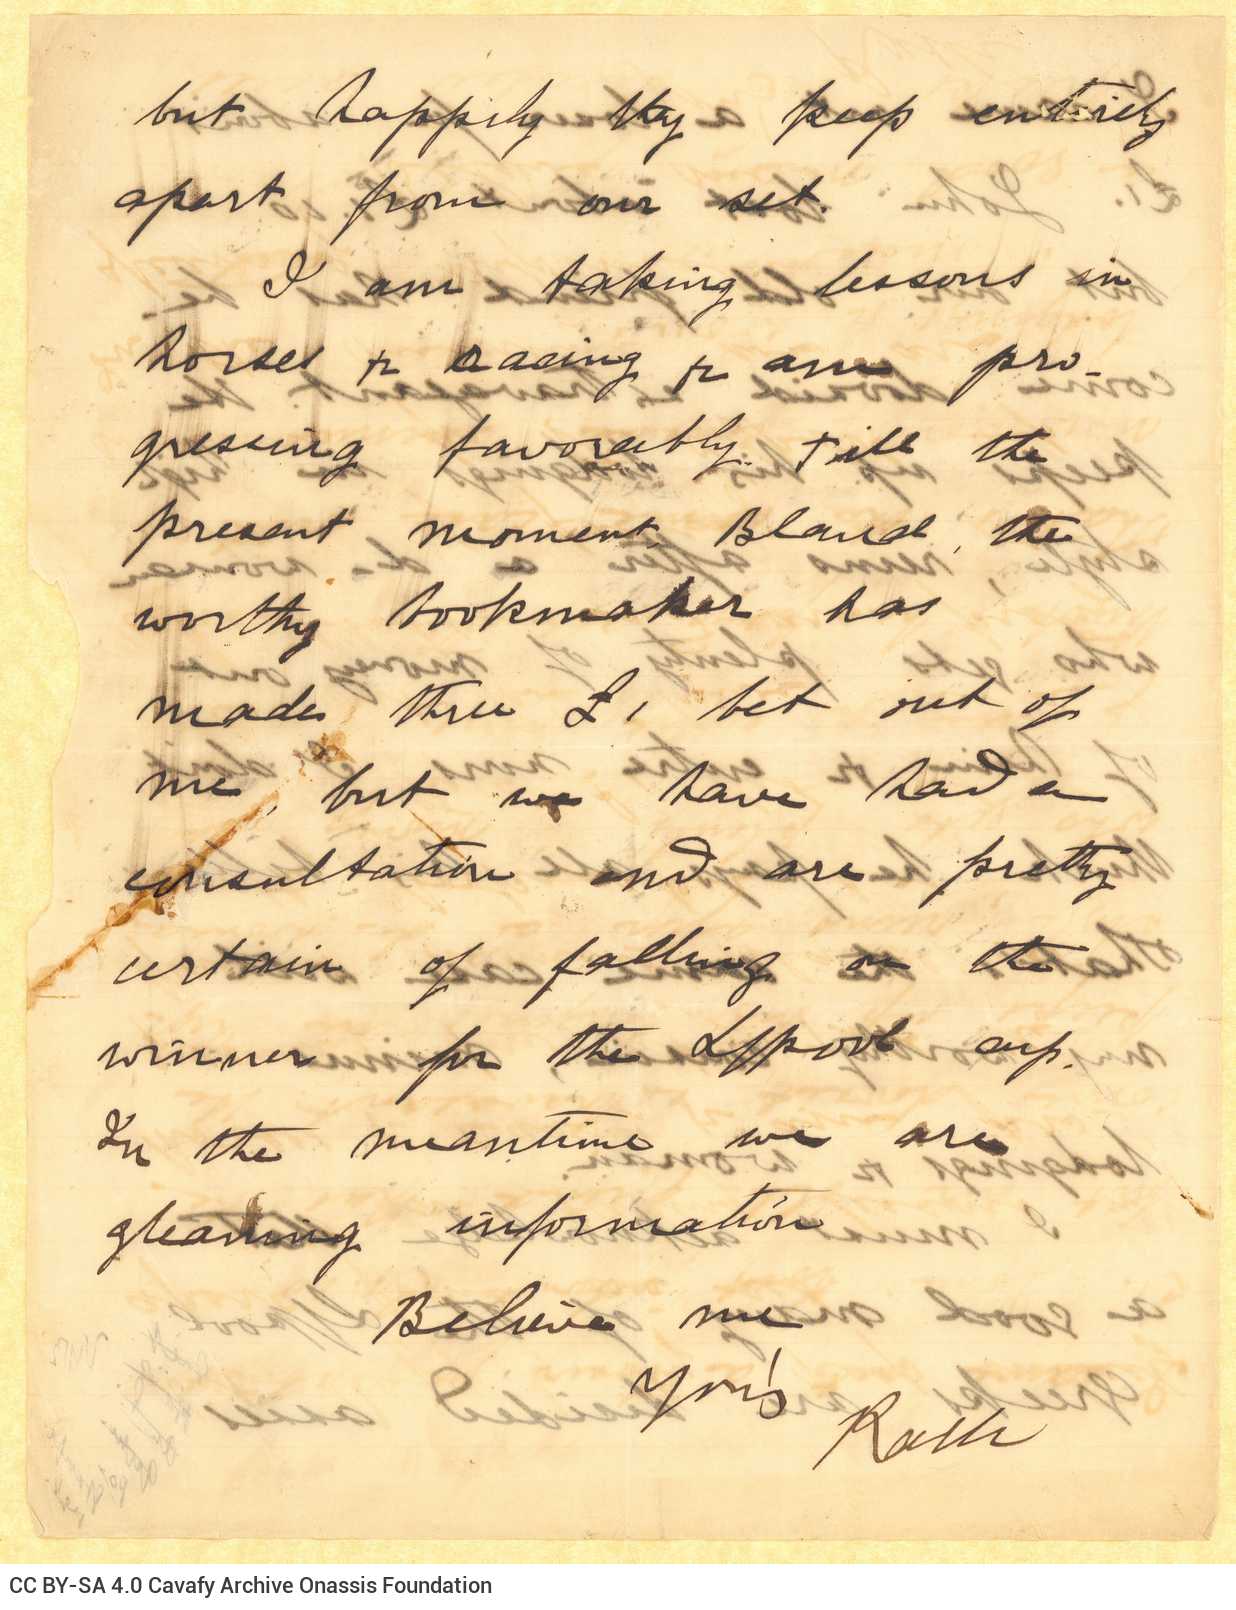 Handwritten letter by Mike Ralli to Cavafy in two sheets, with notes on all sides. It is a reply to a letter he had received.